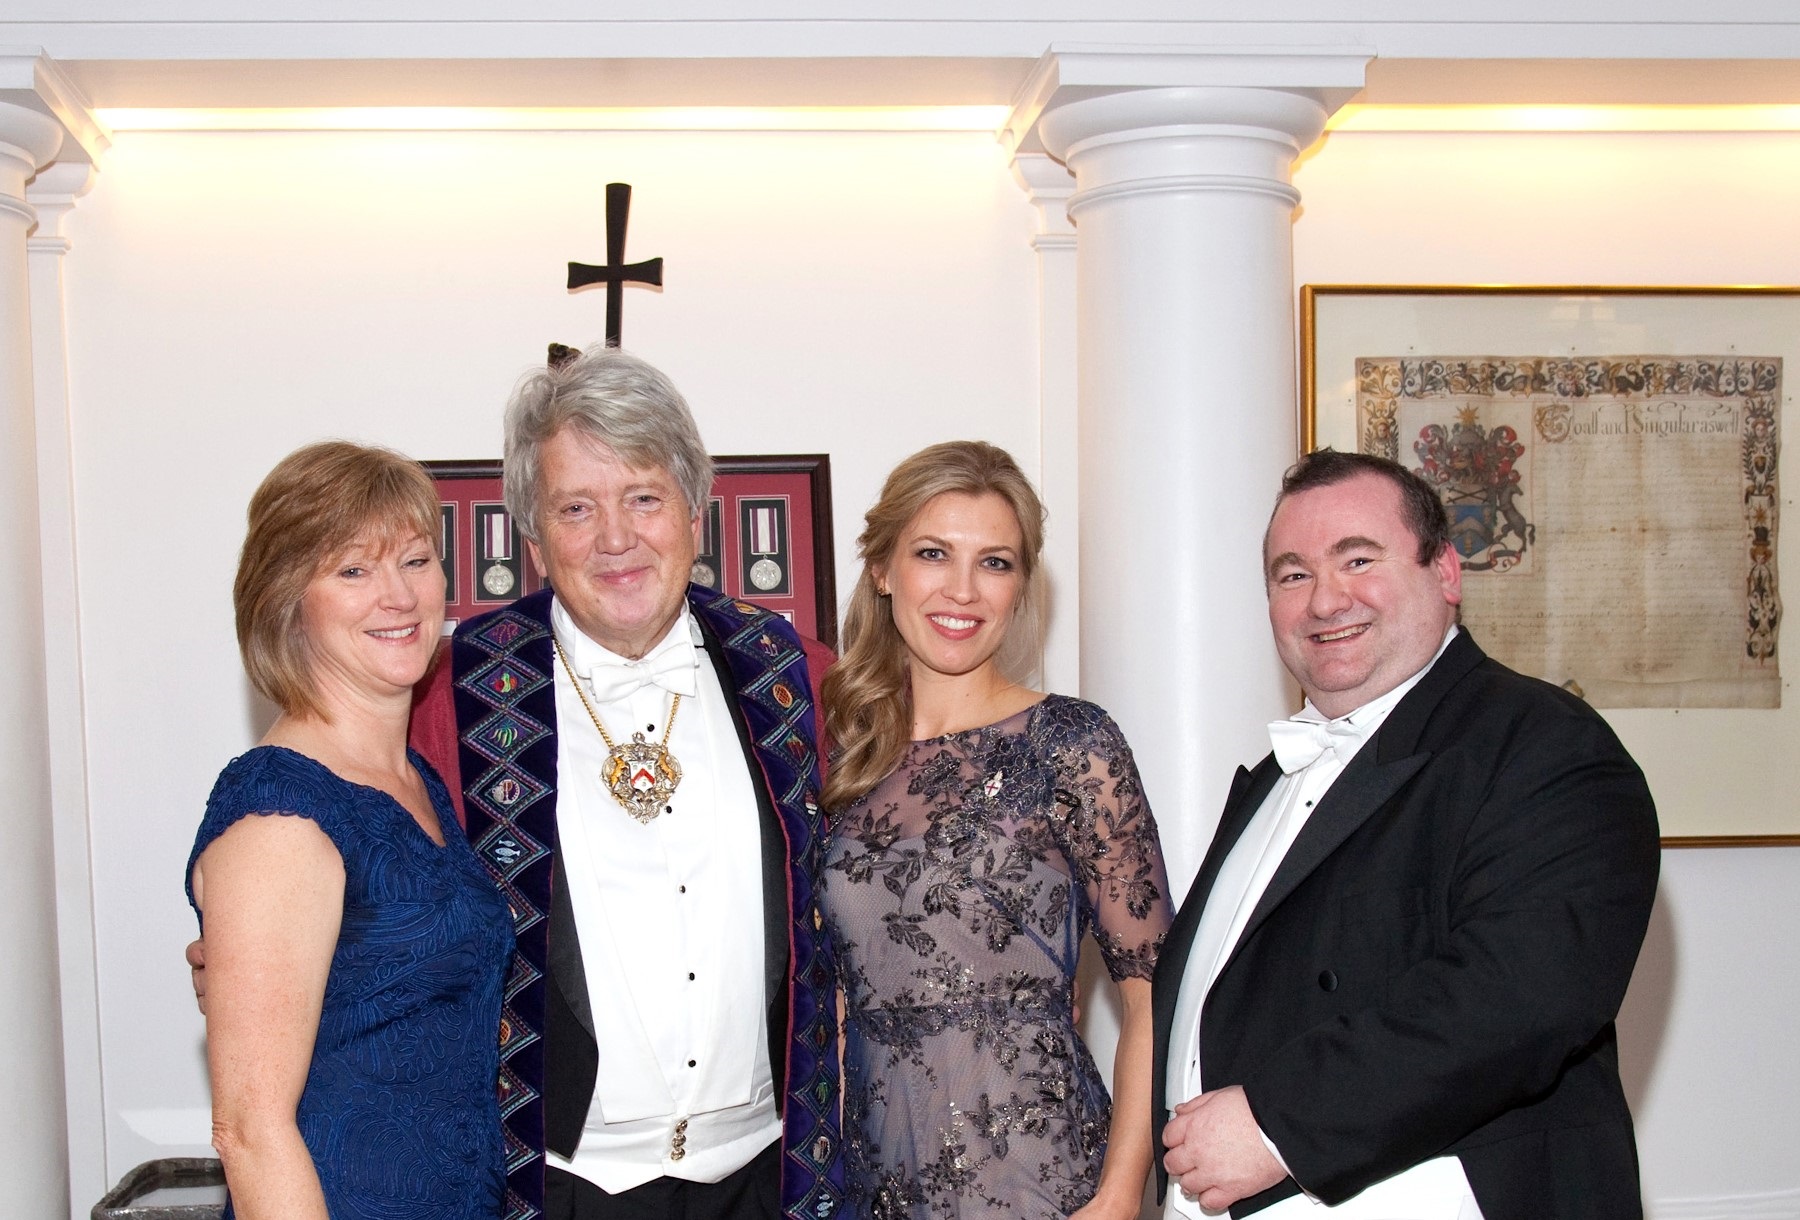 New Master of the Worshipful Company of Cooks